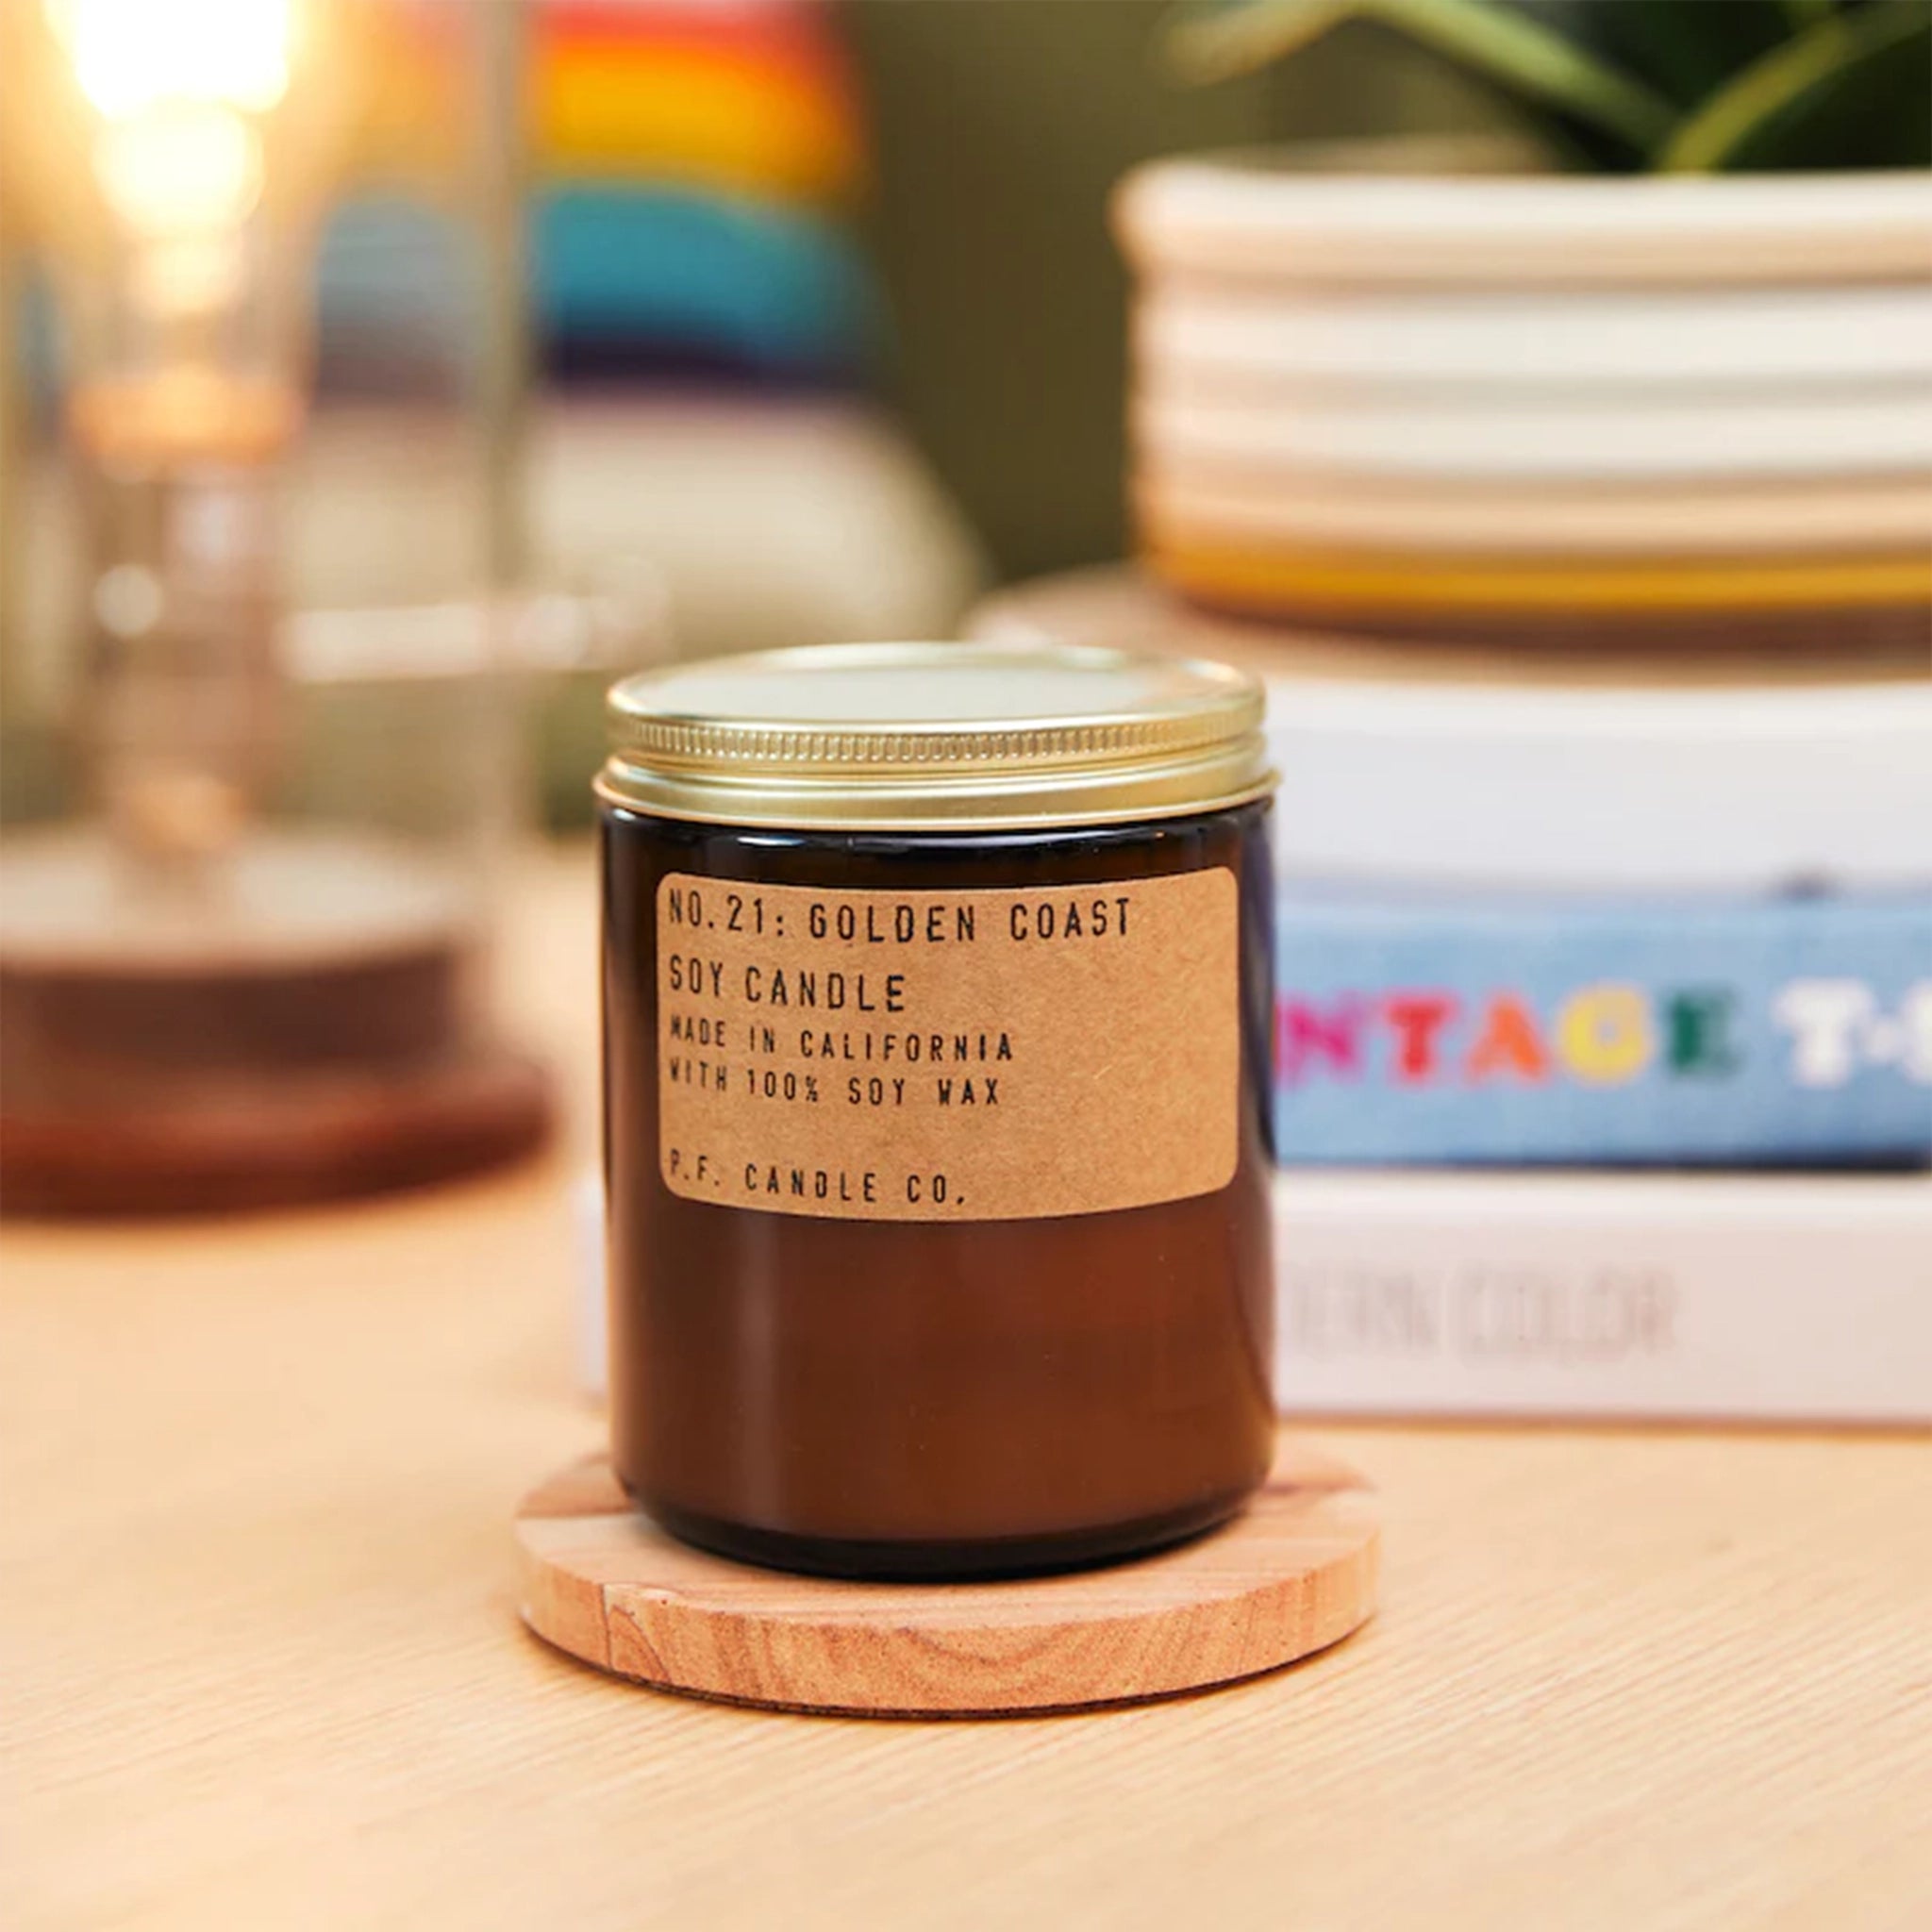 Candle features amber glass with a gold lid. The label is kraft paper with typewriter font that reads &quot;No.21: Golden Coast Soy Candle Handmade in California with 100% Soy Wax. P.F. Candle Co.&quot;